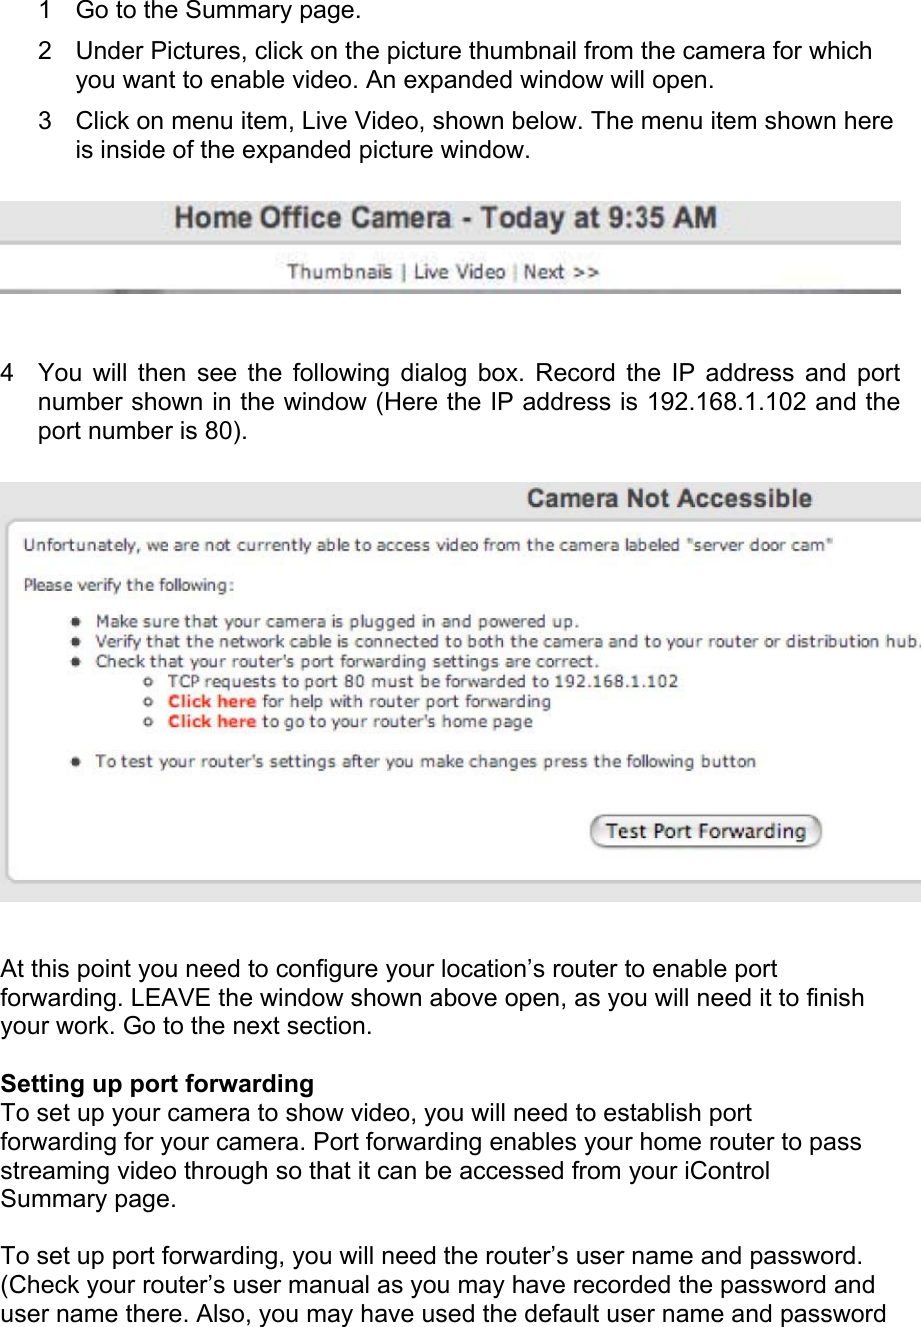 1  Go to the Summary page.  2  Under Pictures, click on the picture thumbnail from the camera for which you want to enable video. An expanded window will open.  3  Click on menu item, Live Video, shown below. The menu item shown here is inside of the expanded picture window.   4  You will then see the following dialog box. Record the IP address and port number shown in the window (Here the IP address is 192.168.1.102 and the port number is 80).   At this point you need to configure your location’s router to enable port forwarding. LEAVE the window shown above open, as you will need it to finish your work. Go to the next section.  Setting up port forwarding  To set up your camera to show video, you will need to establish port forwarding for your camera. Port forwarding enables your home router to pass streaming video through so that it can be accessed from your iControl Summary page.  To set up port forwarding, you will need the router’s user name and password. (Check your router’s user manual as you may have recorded the password and user name there. Also, you may have used the default user name and password 